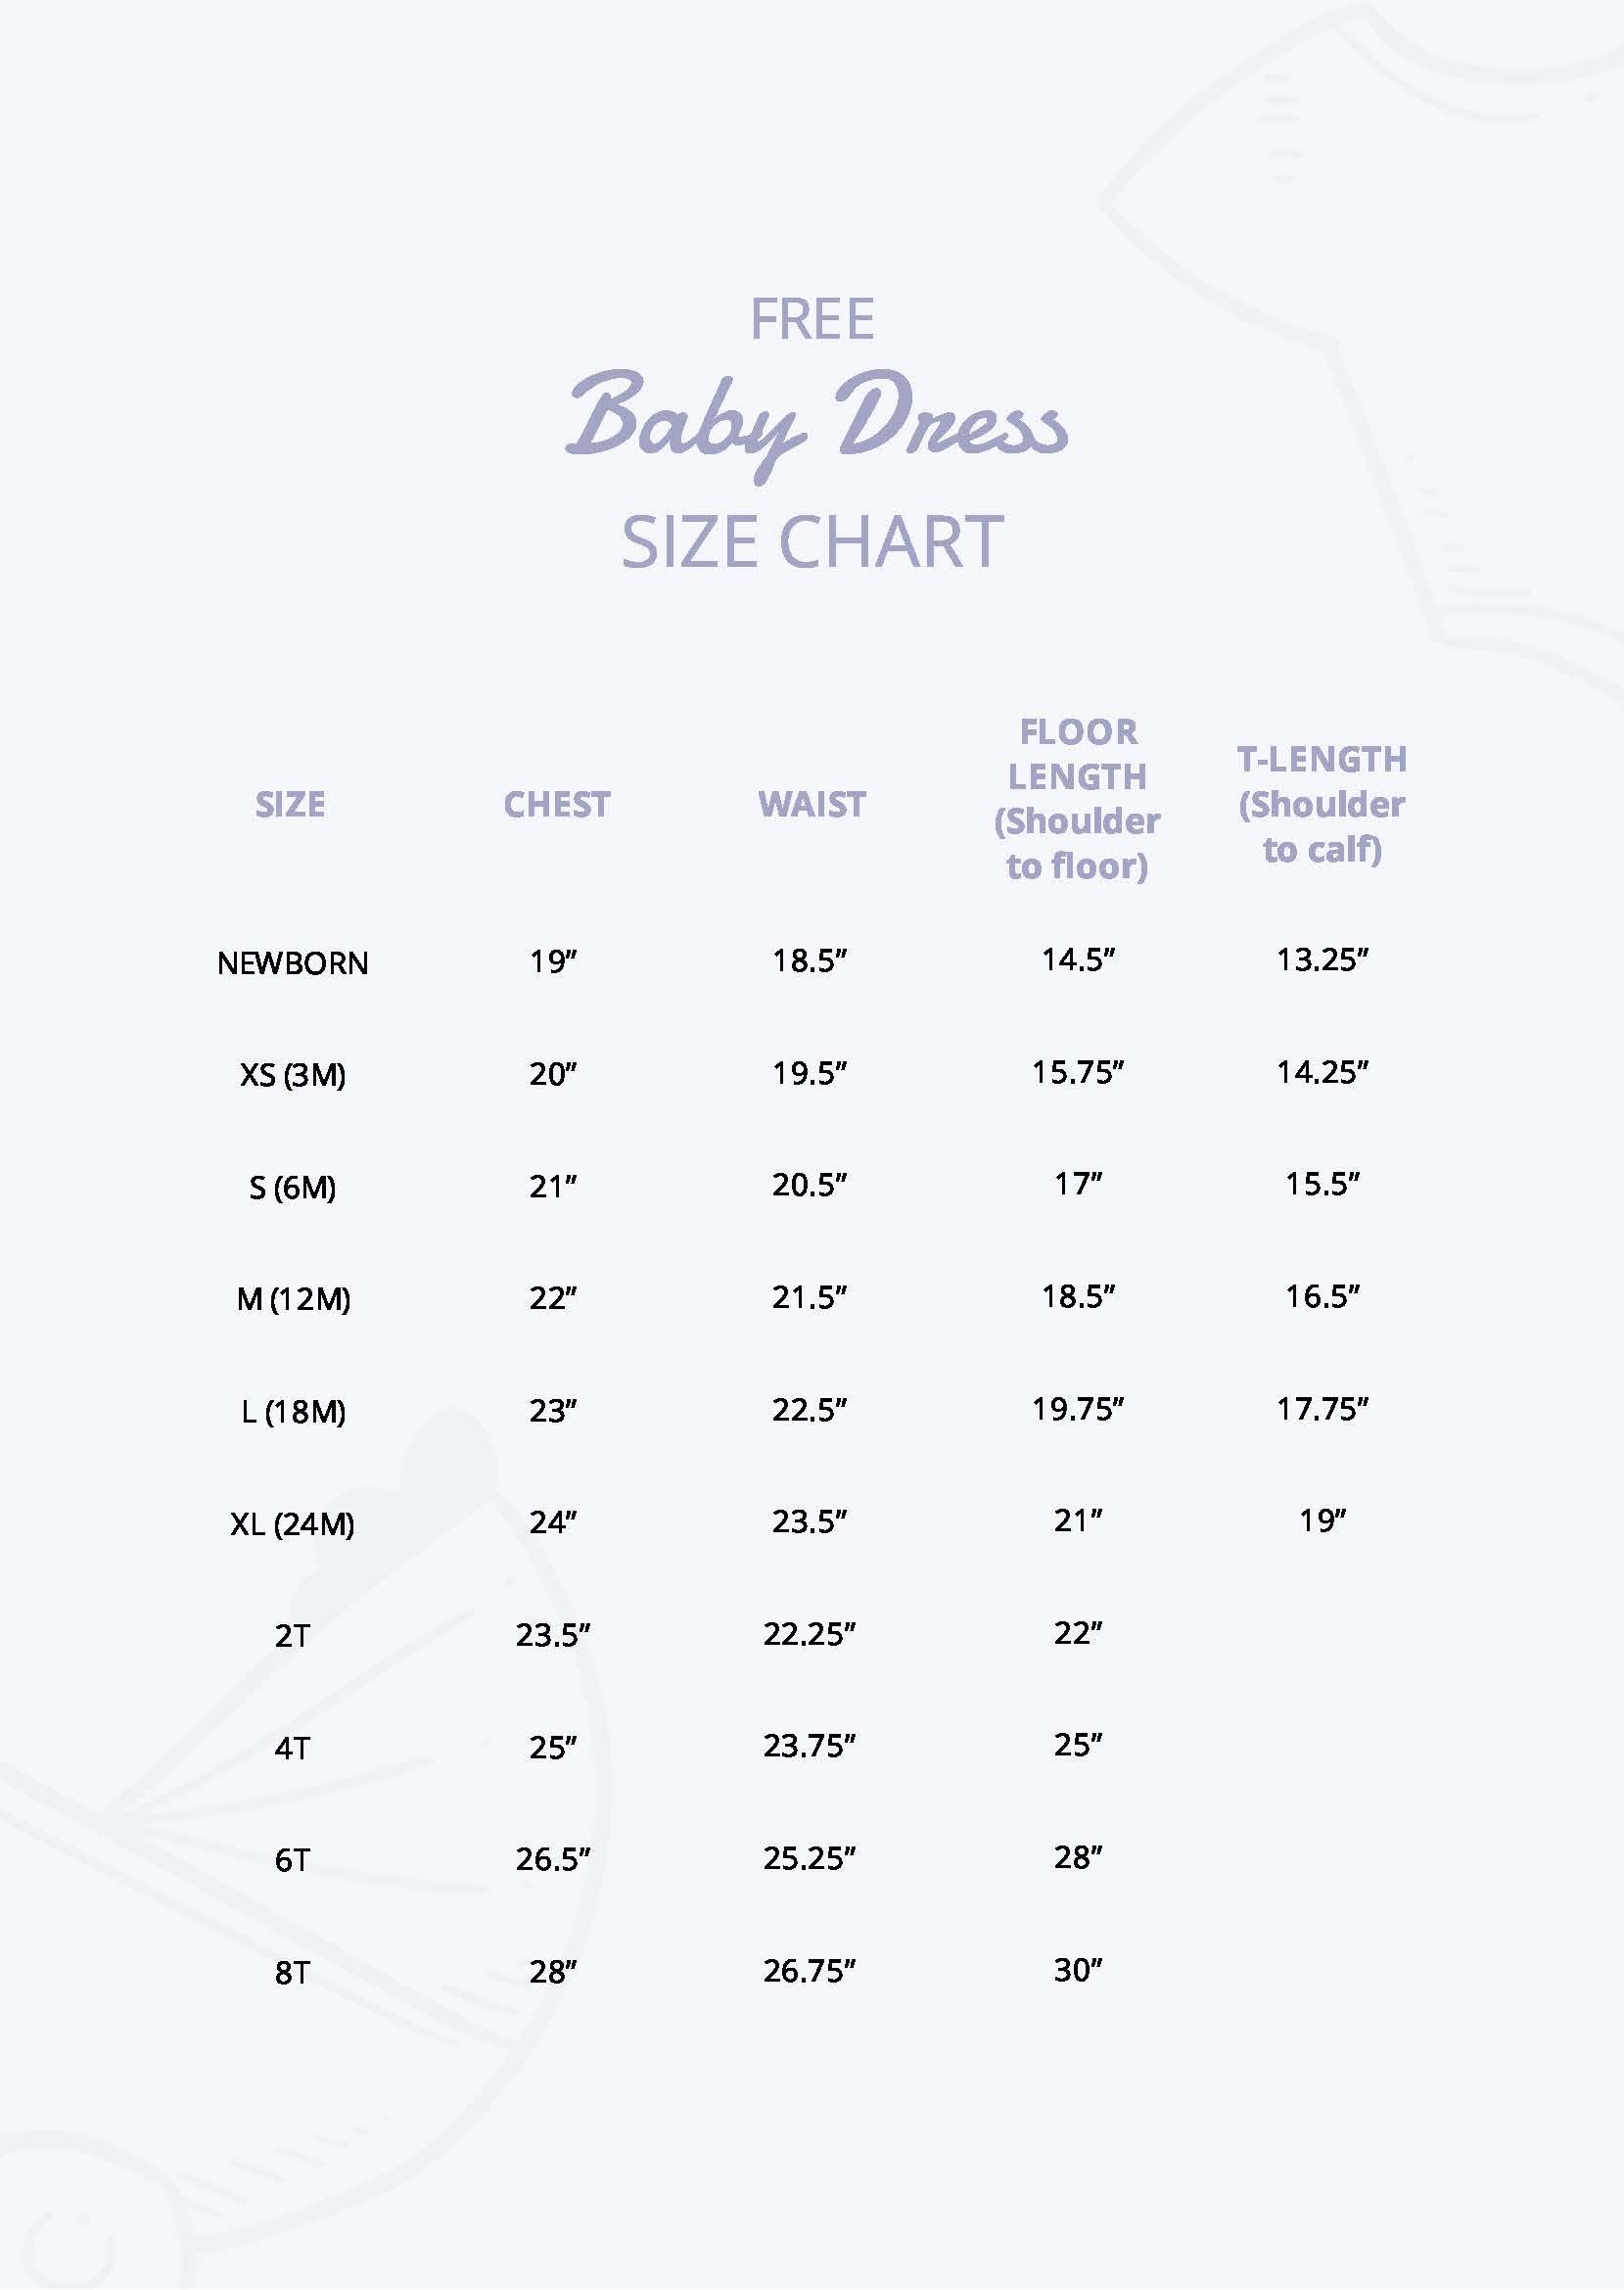 Baby Girl Dress Size Chart in PDF - Download